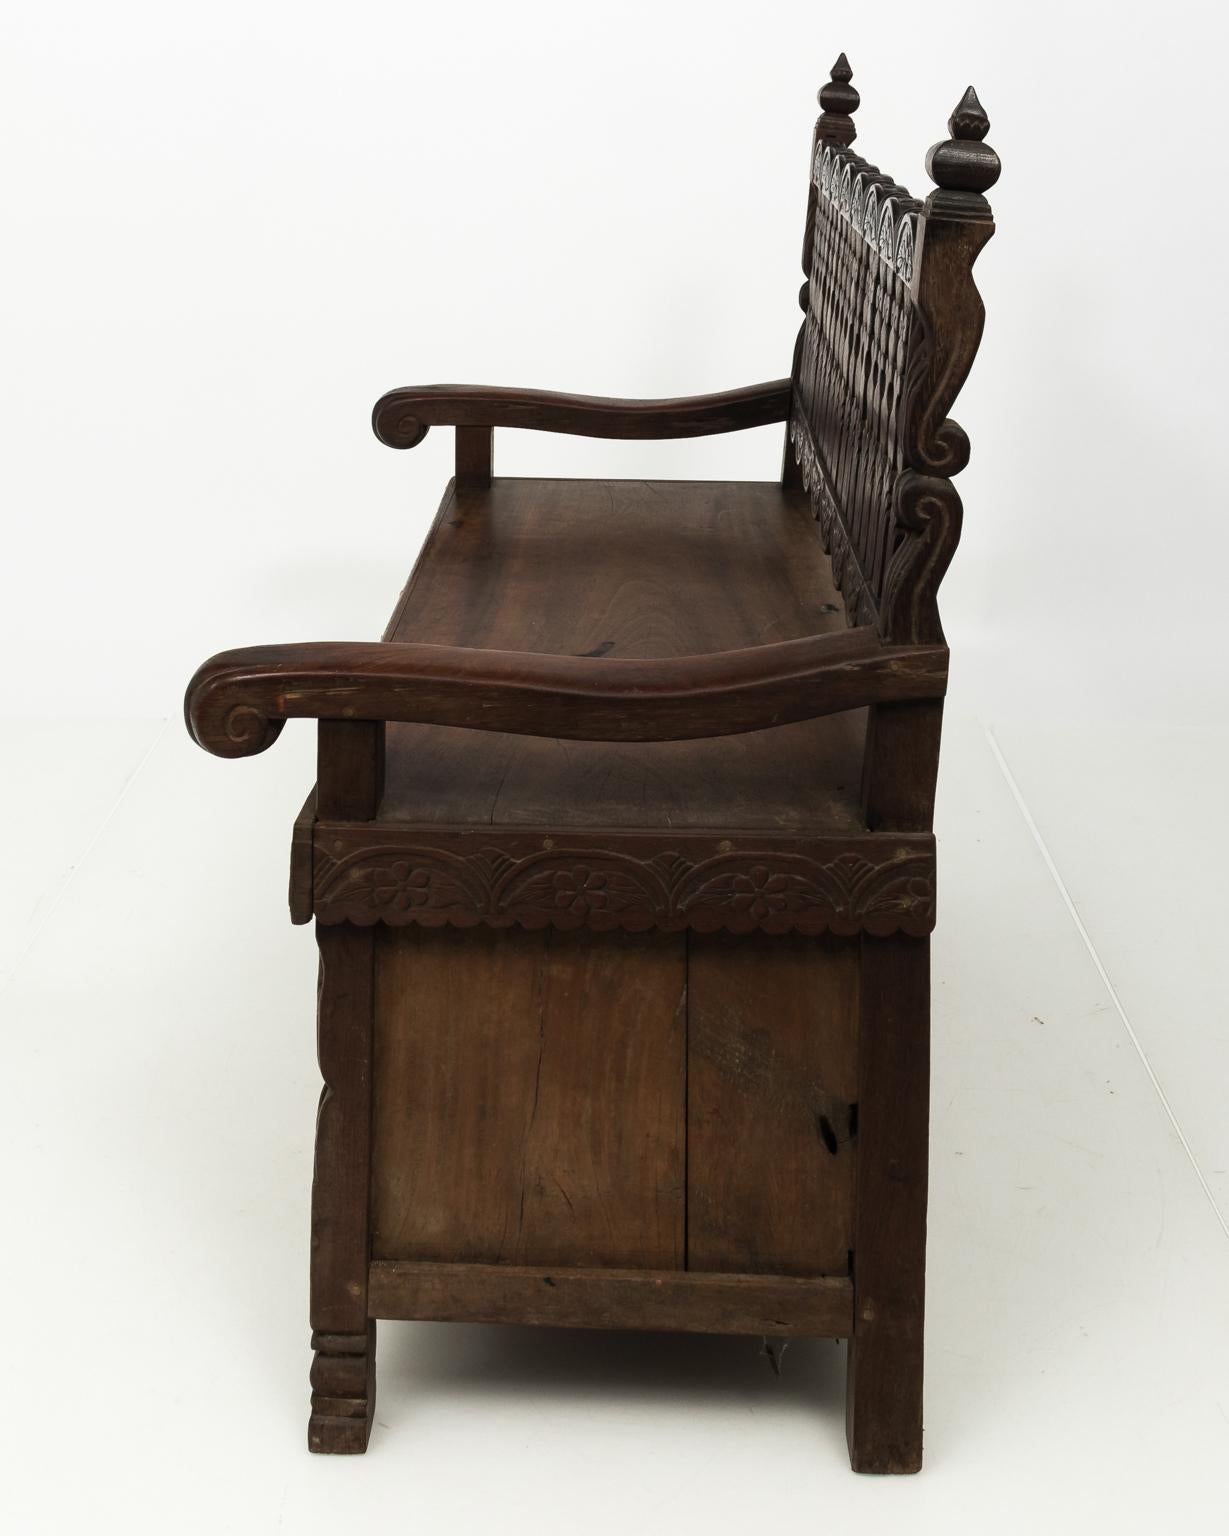 Anglo-Indian hall bench in teakwood with carved back splats and storage below the seat behind panels. The bench also features carved floral trim and scrolled arms, circa 19th century.
 